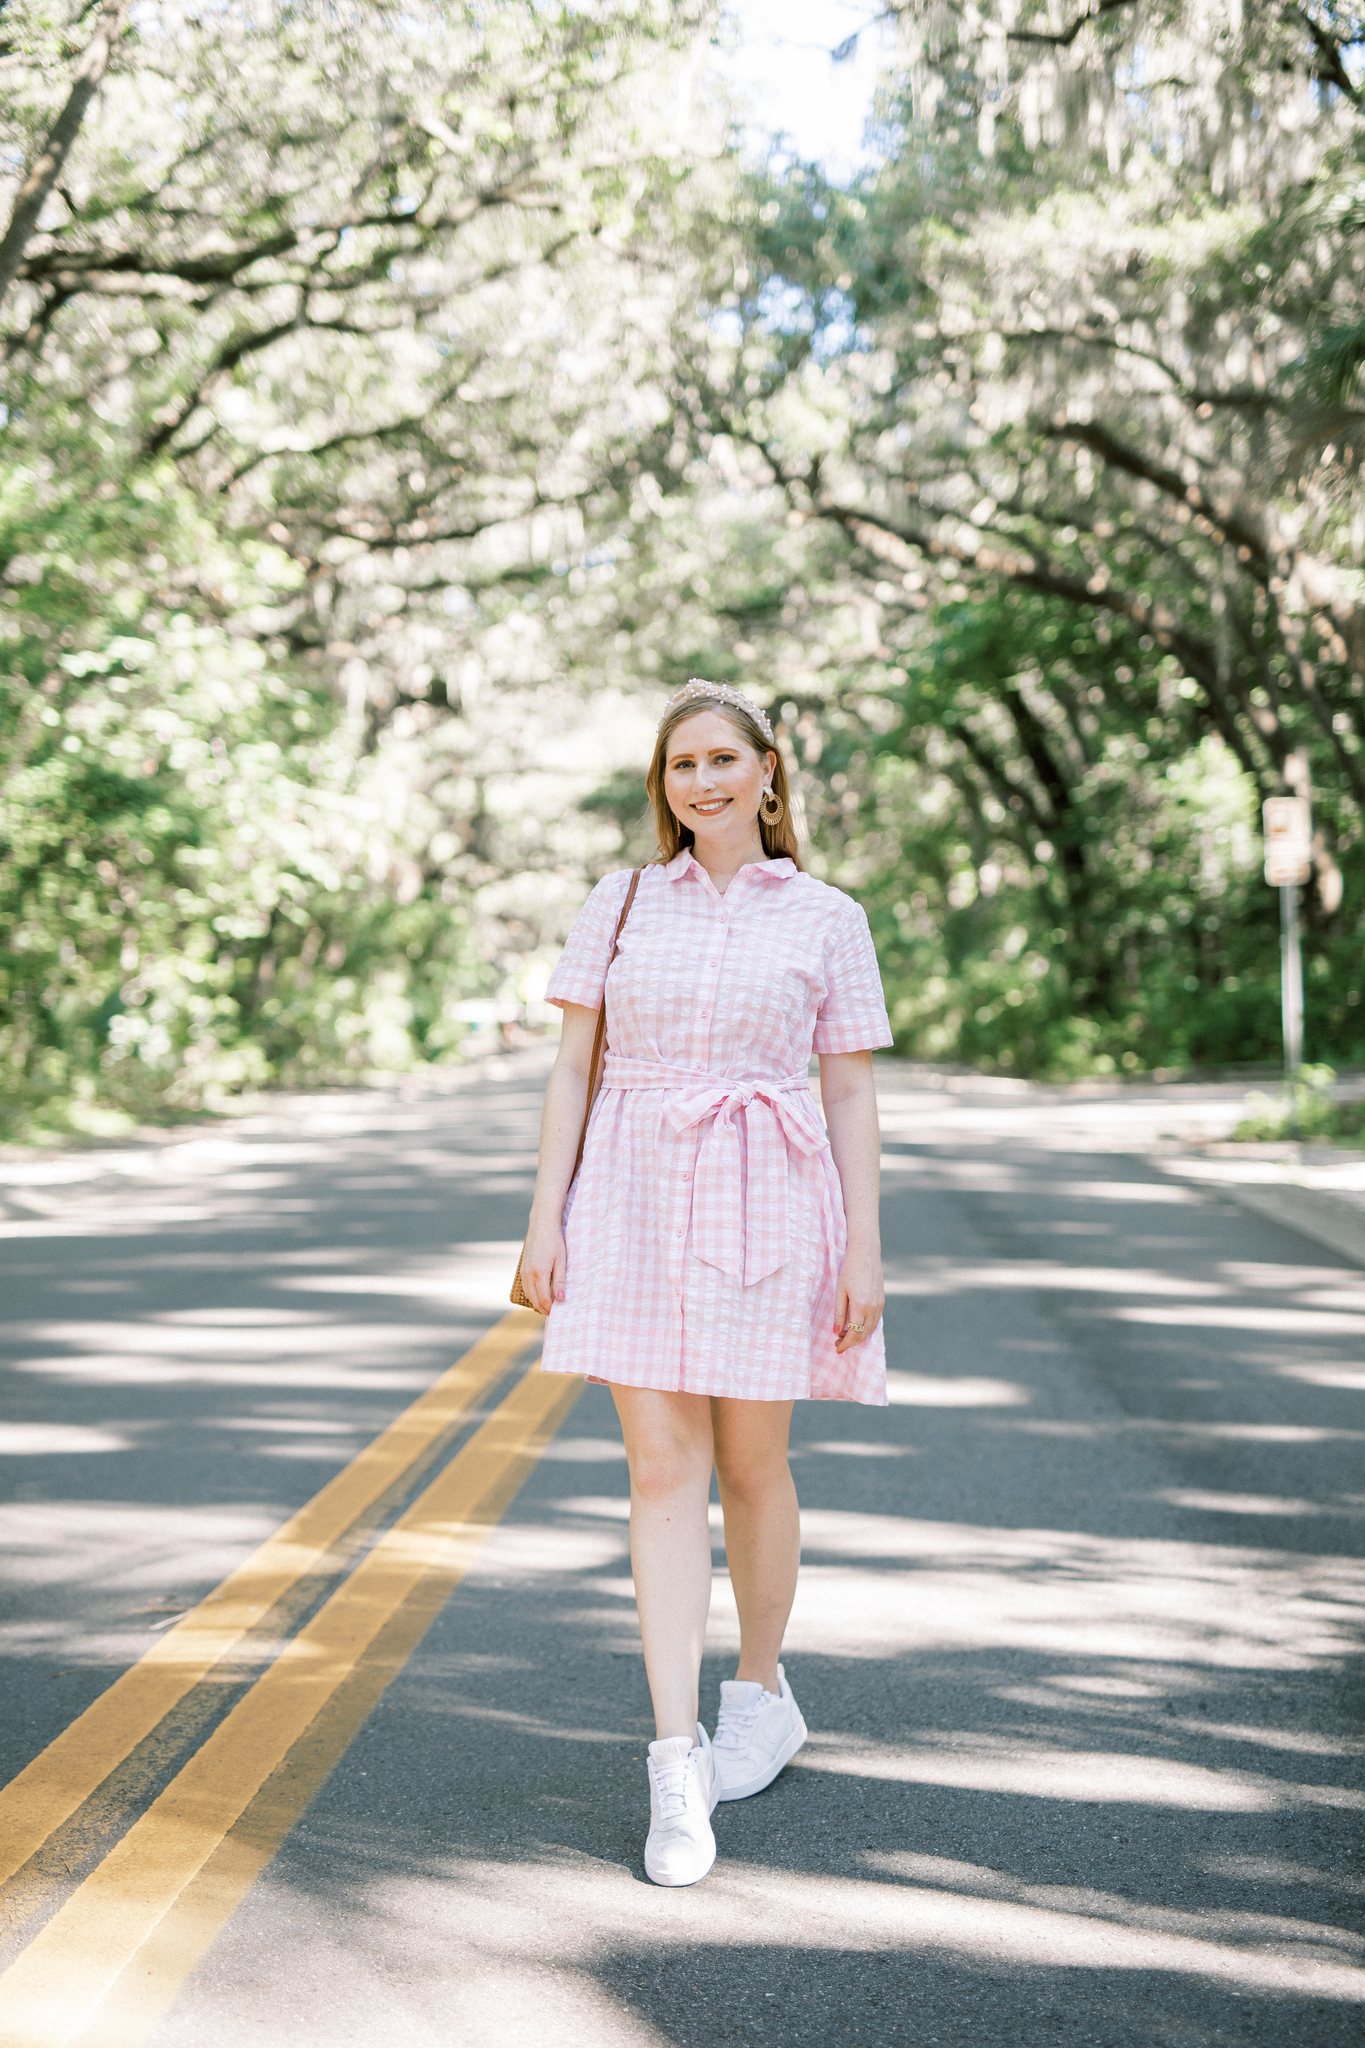 Affordable Gingham Shirtdress for Summer | Women's Gingham Button-Front Shirtdress - Lisa Marie Fernandez for Target | Affordable by Amanda, Florida Style Blogger 